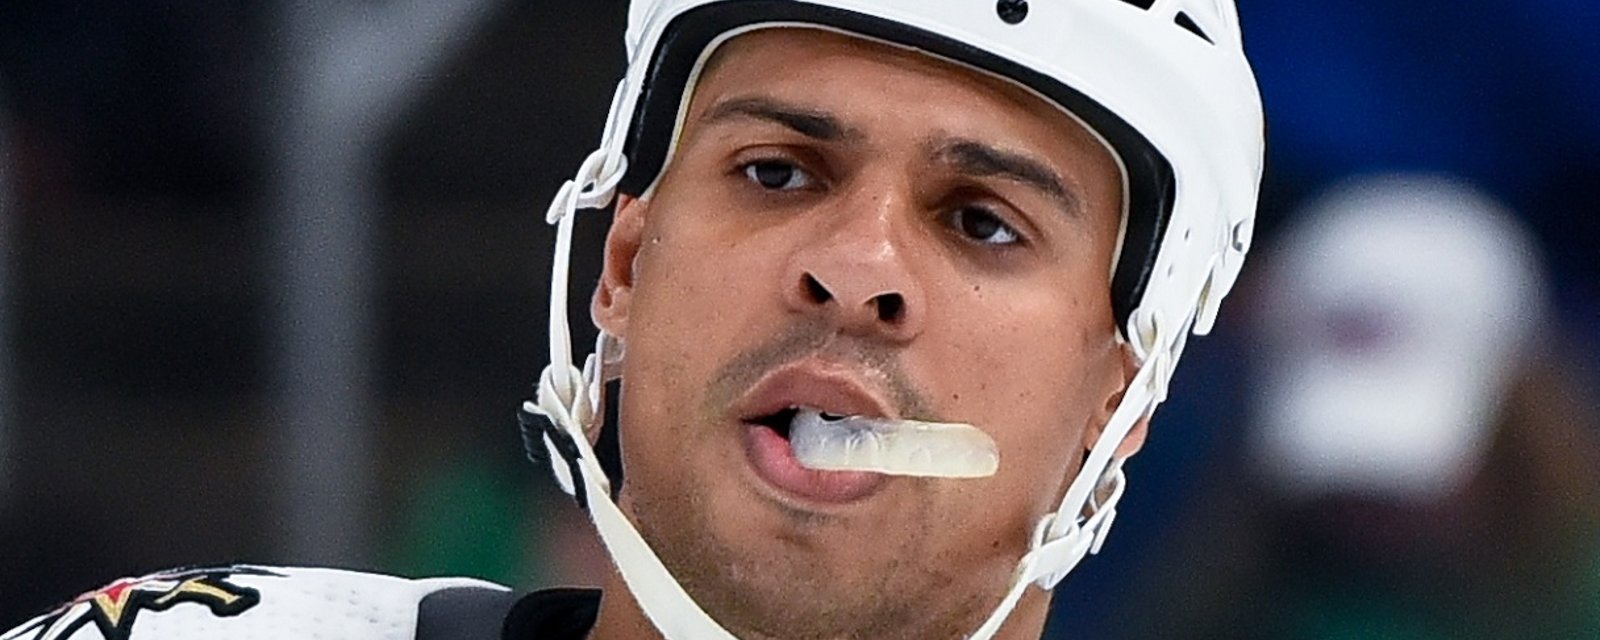 Ryan Reaves shares his unique perspective on the current turmoil in America.